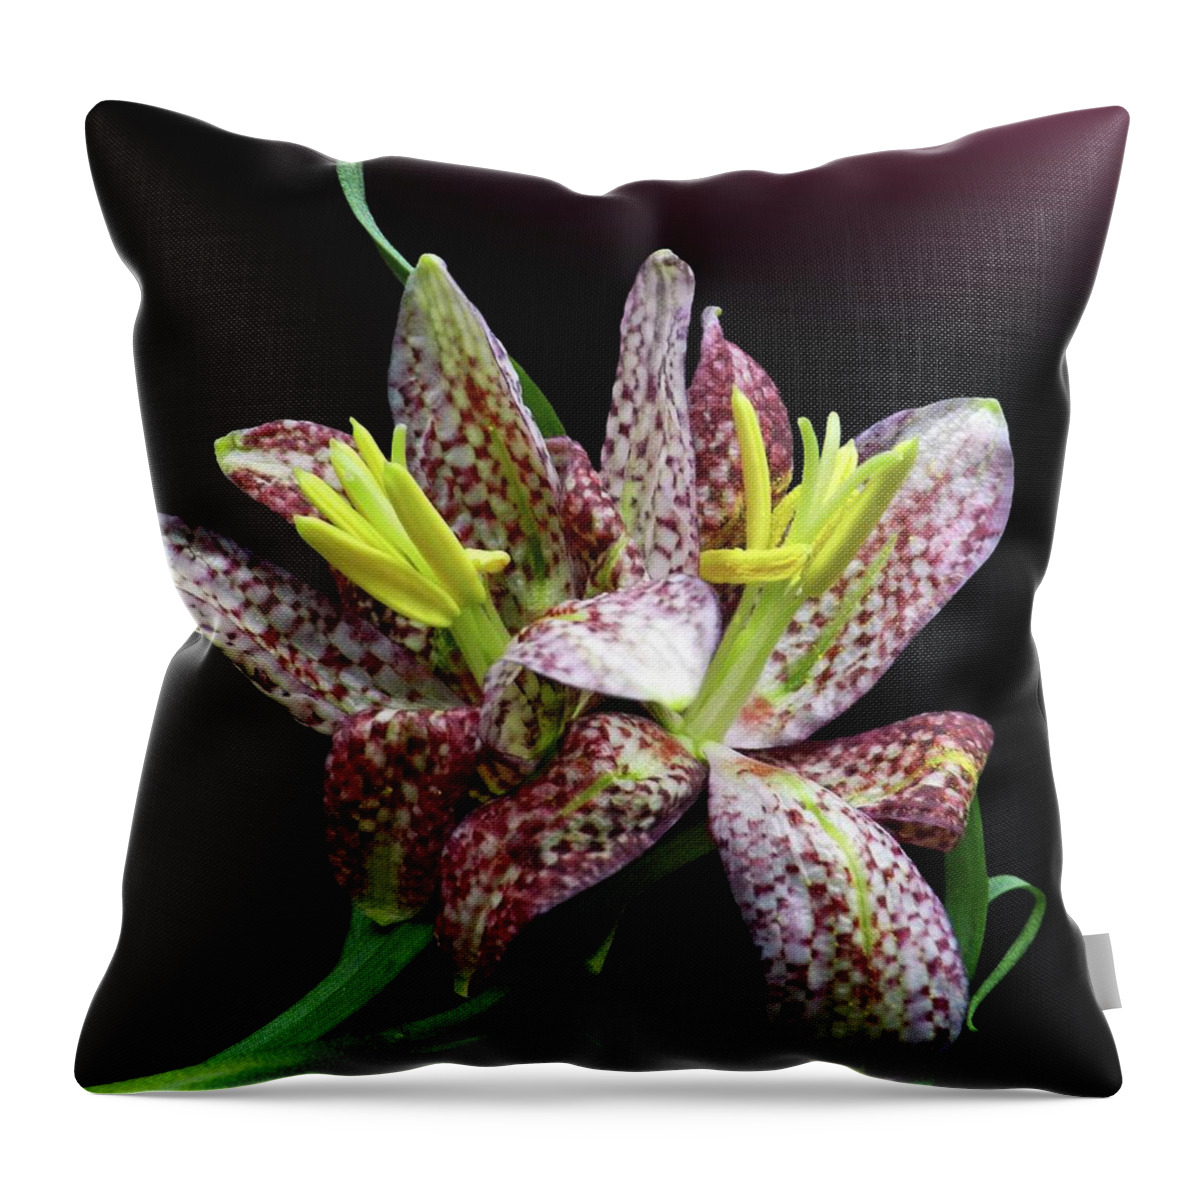 Black Background Throw Pillow featuring the photograph Two Checkered Daffodils by Gitpix